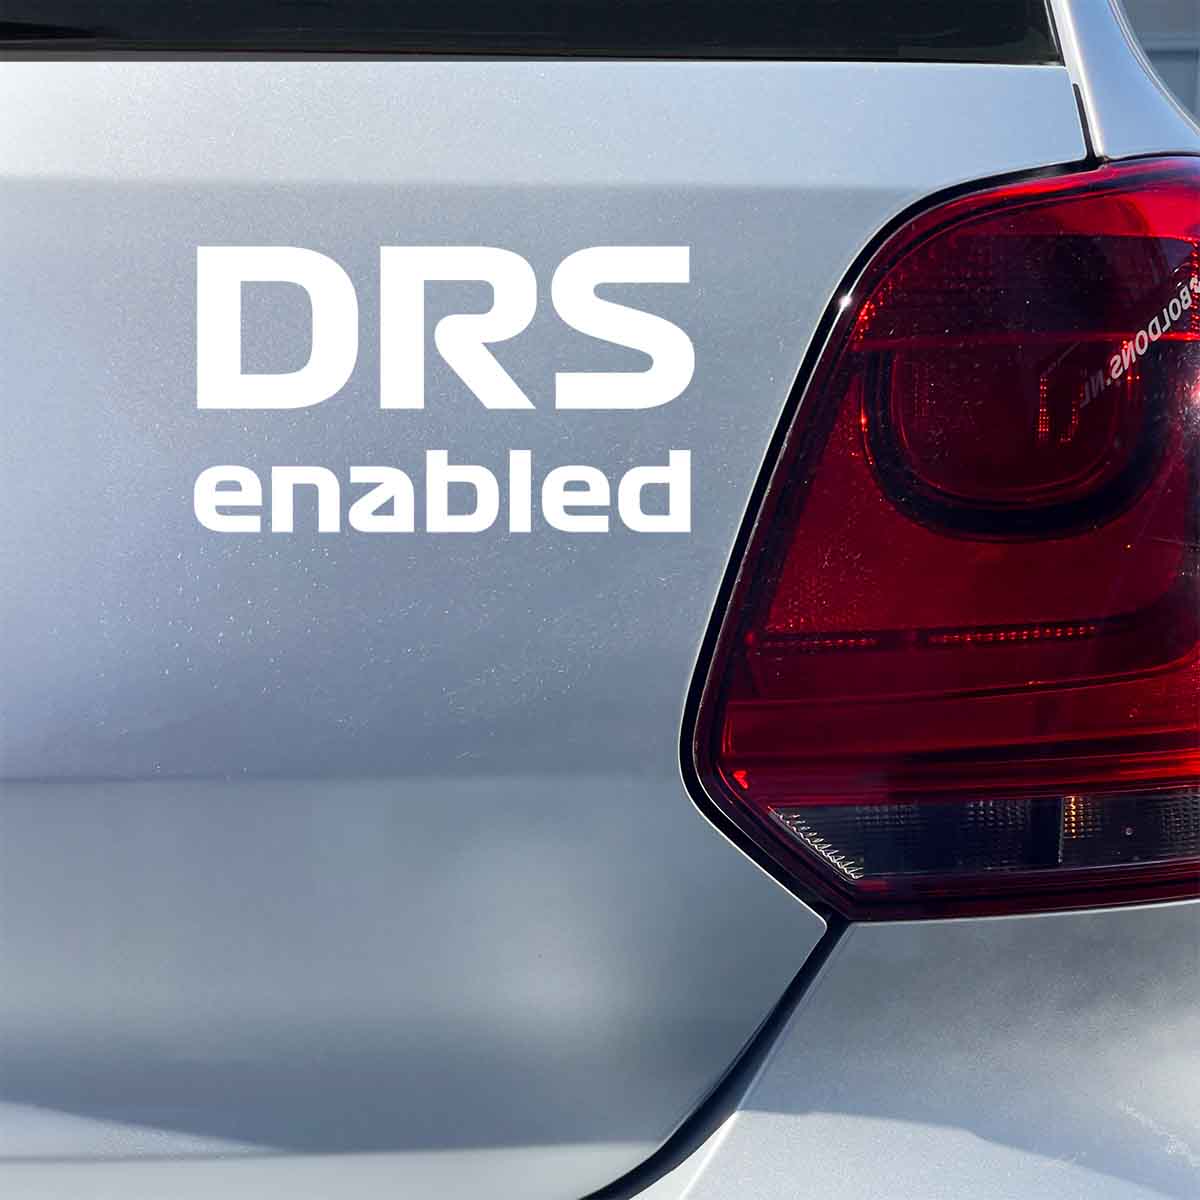 DRS enabled Sticker